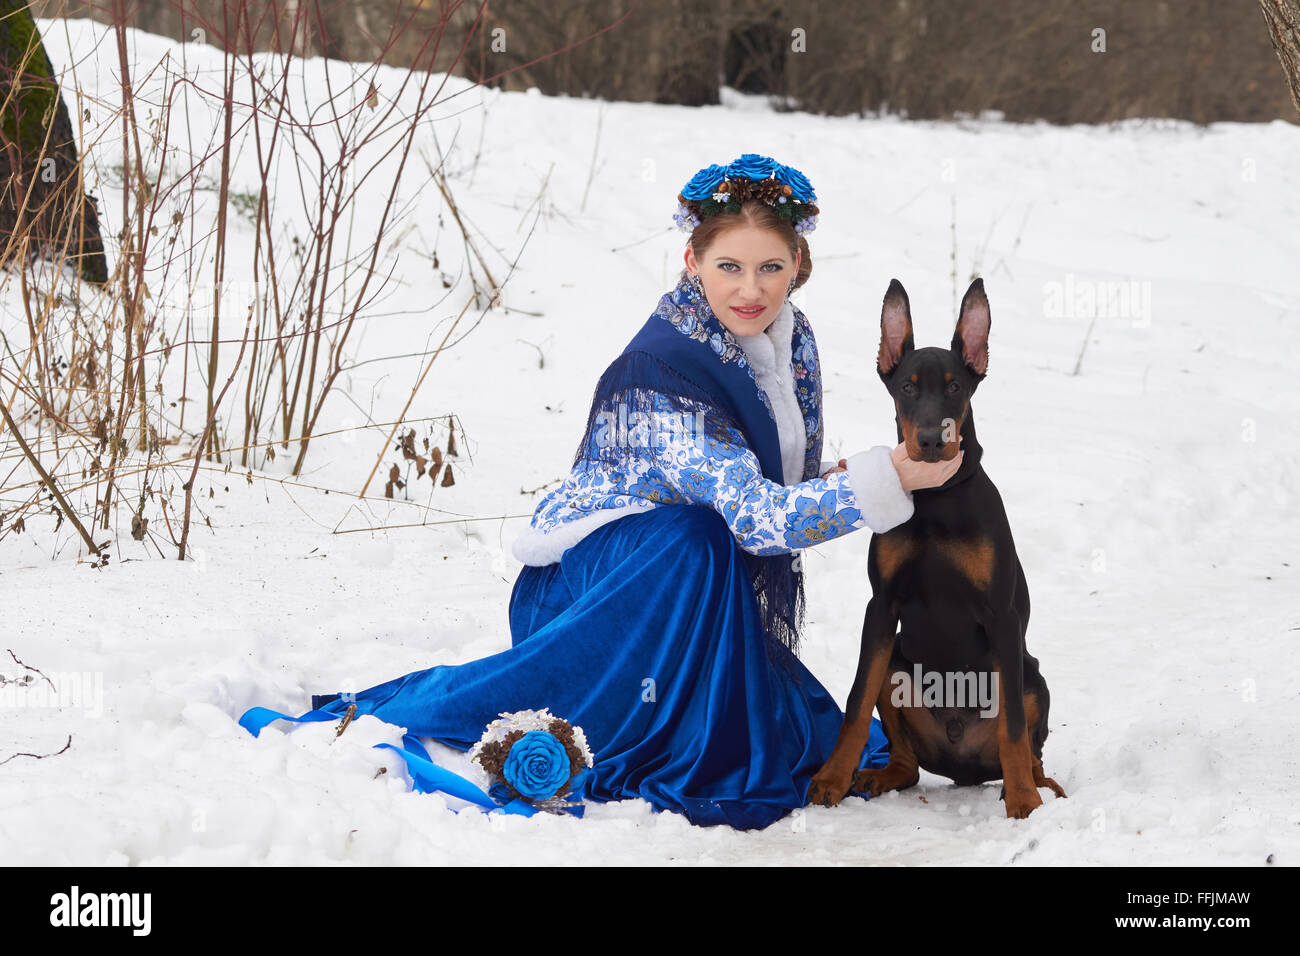 Young russian woman in traditional winter clothing with Doberman Pinscher Stock Photo